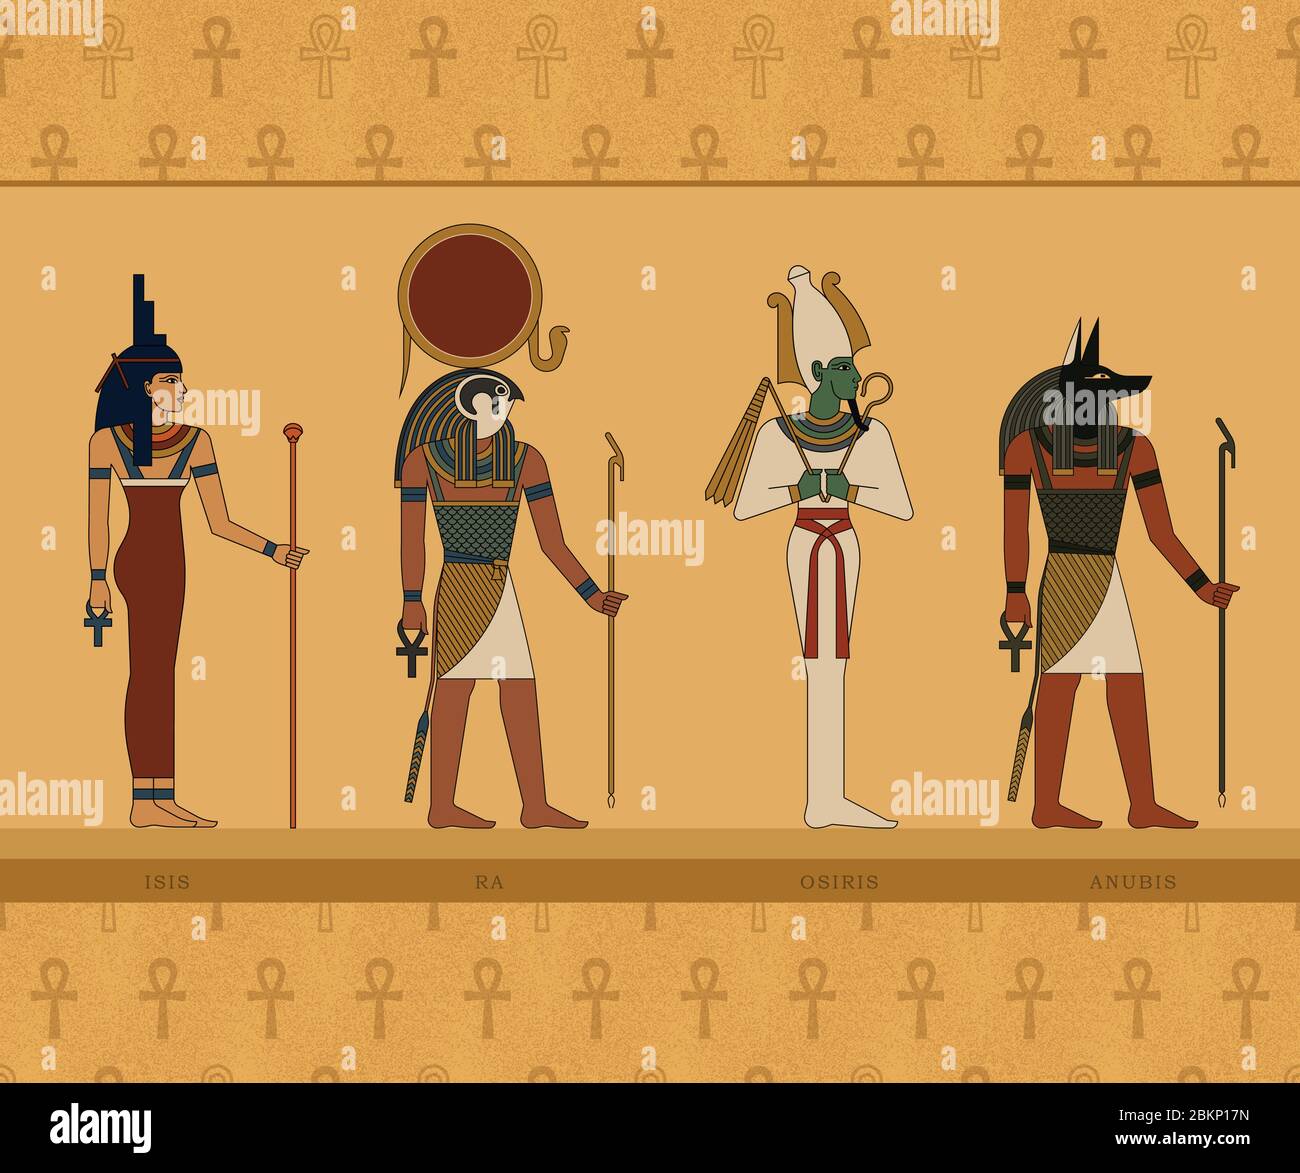 How Was Anubis Worshipped As a Protector of the Dead and Guide Through the Afterlife?    